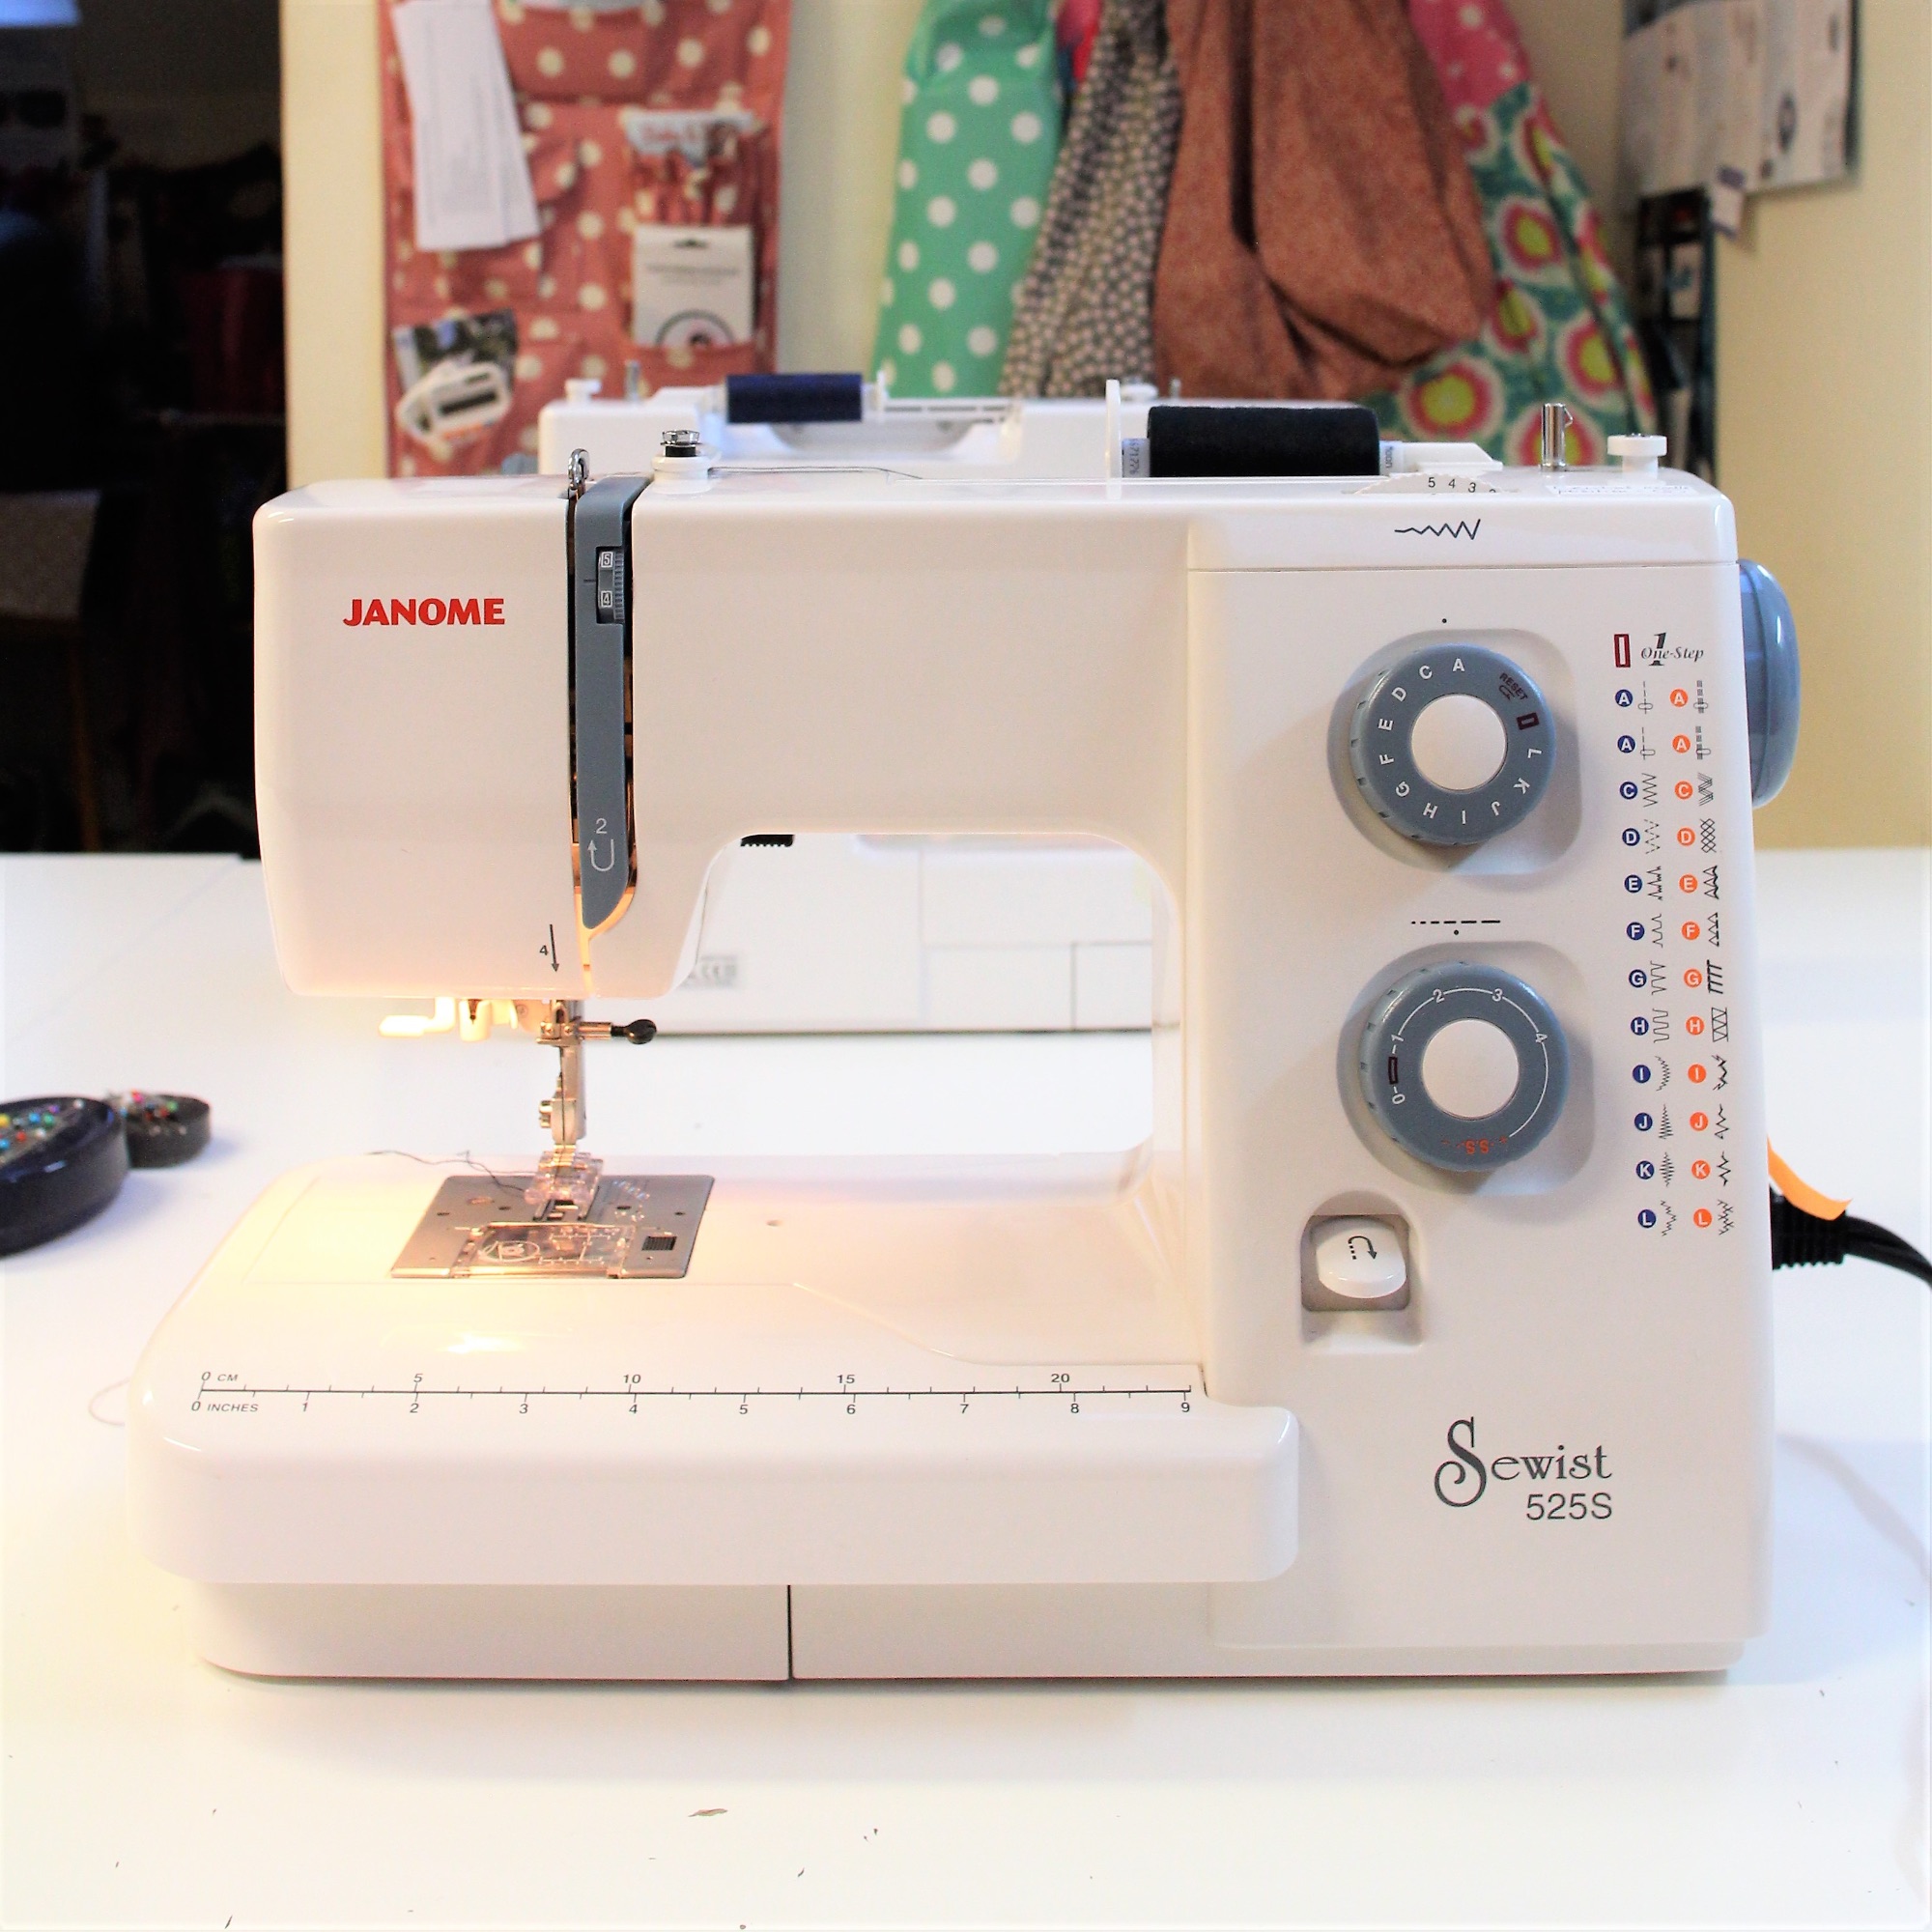 Sewing Machine Repairs and Buying in Brighton and Hove